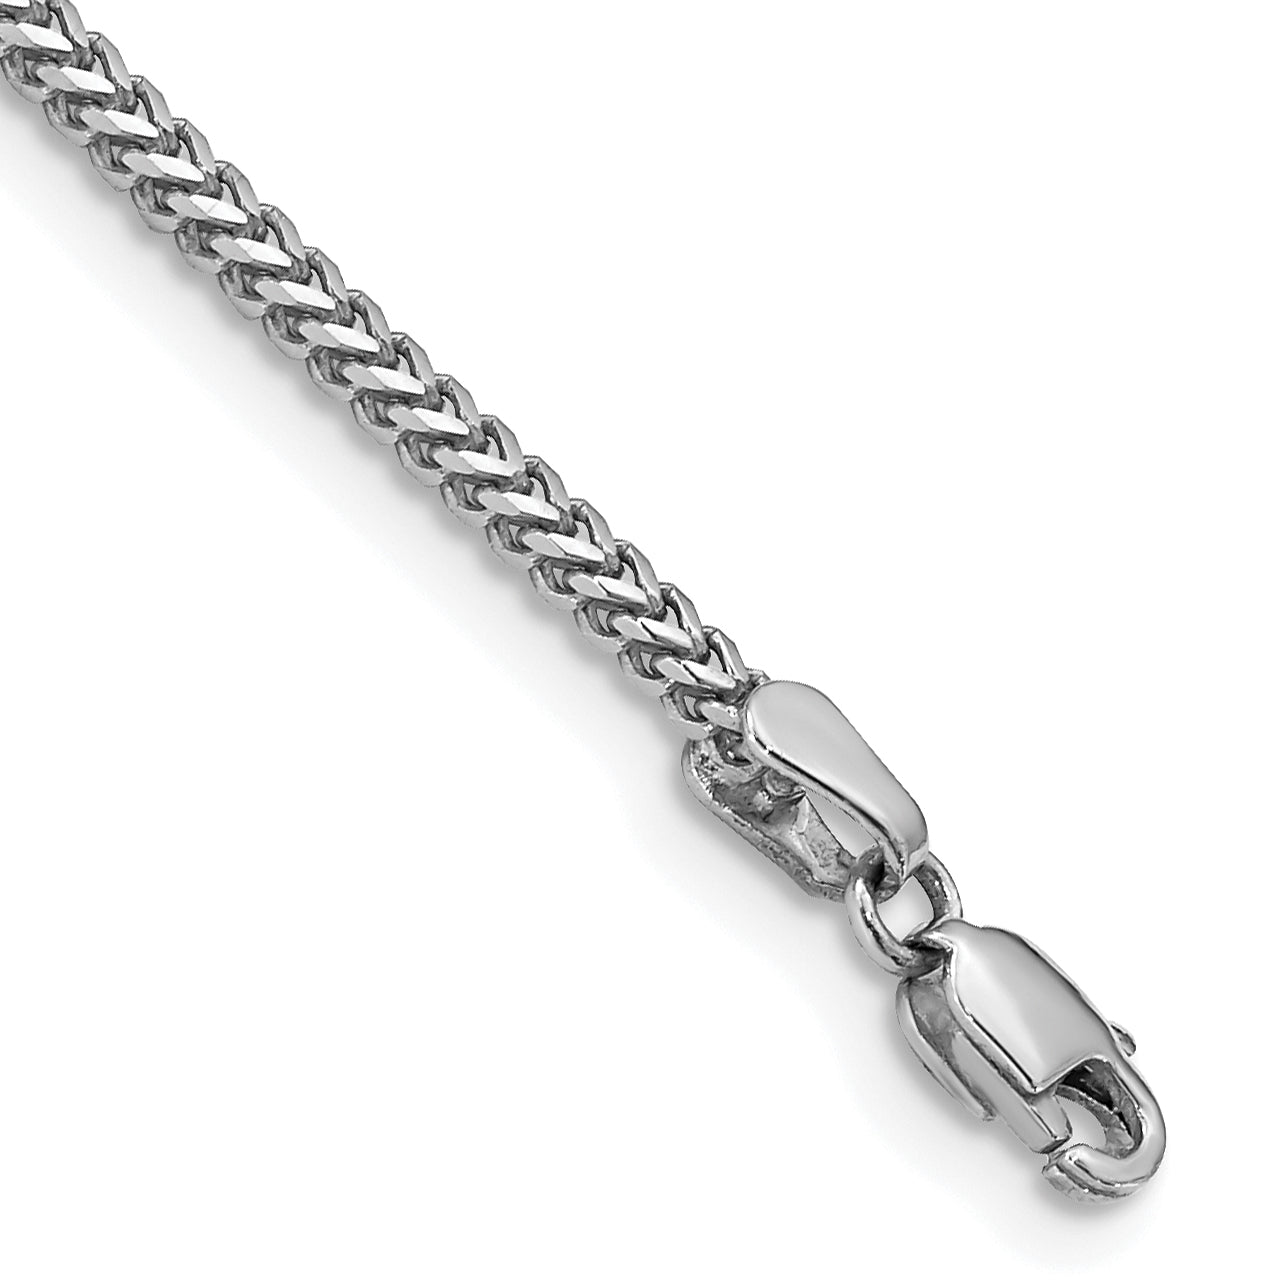 14K White Gold 7 inch 1.5mm Franco with Lobster Clasp Bracelet